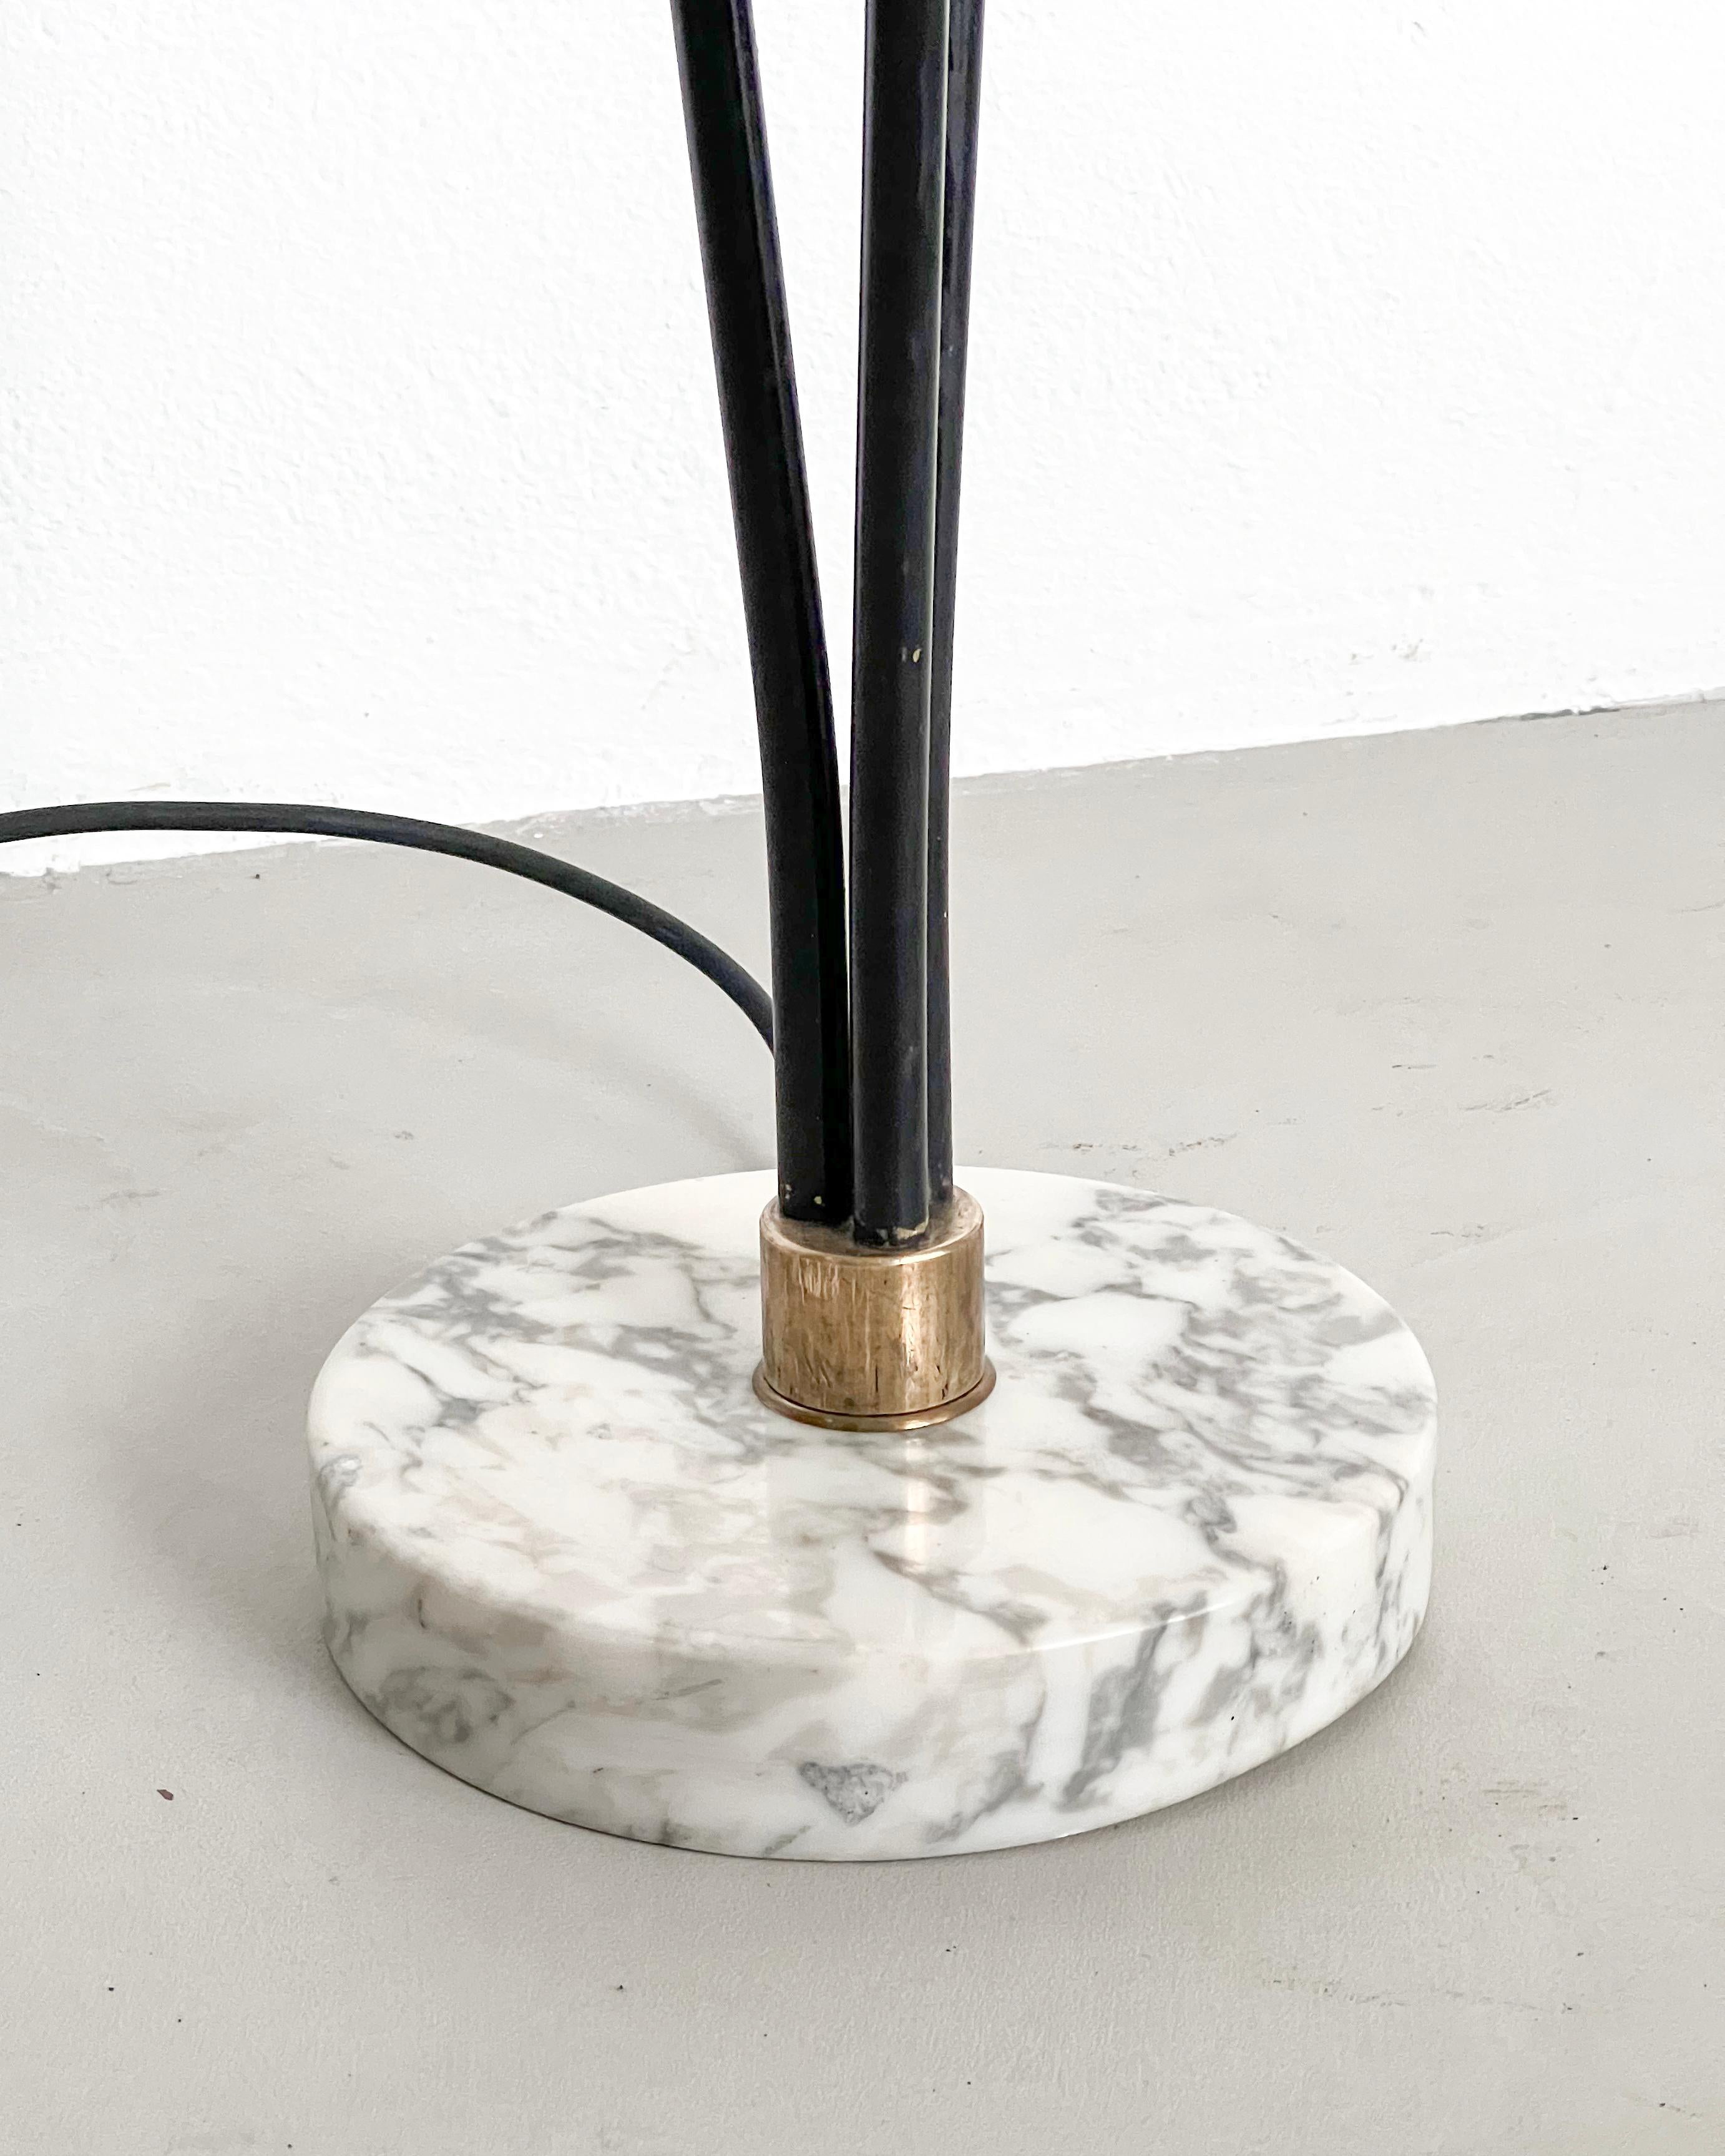 Offered for sale is a vintage floor lamp, made in Italy in the 1950s. It's crafted from metal and brass and has a round white marble base with a nice texture. It has three light bulbs, with elegantly shaped shades in white opaline glass. The three